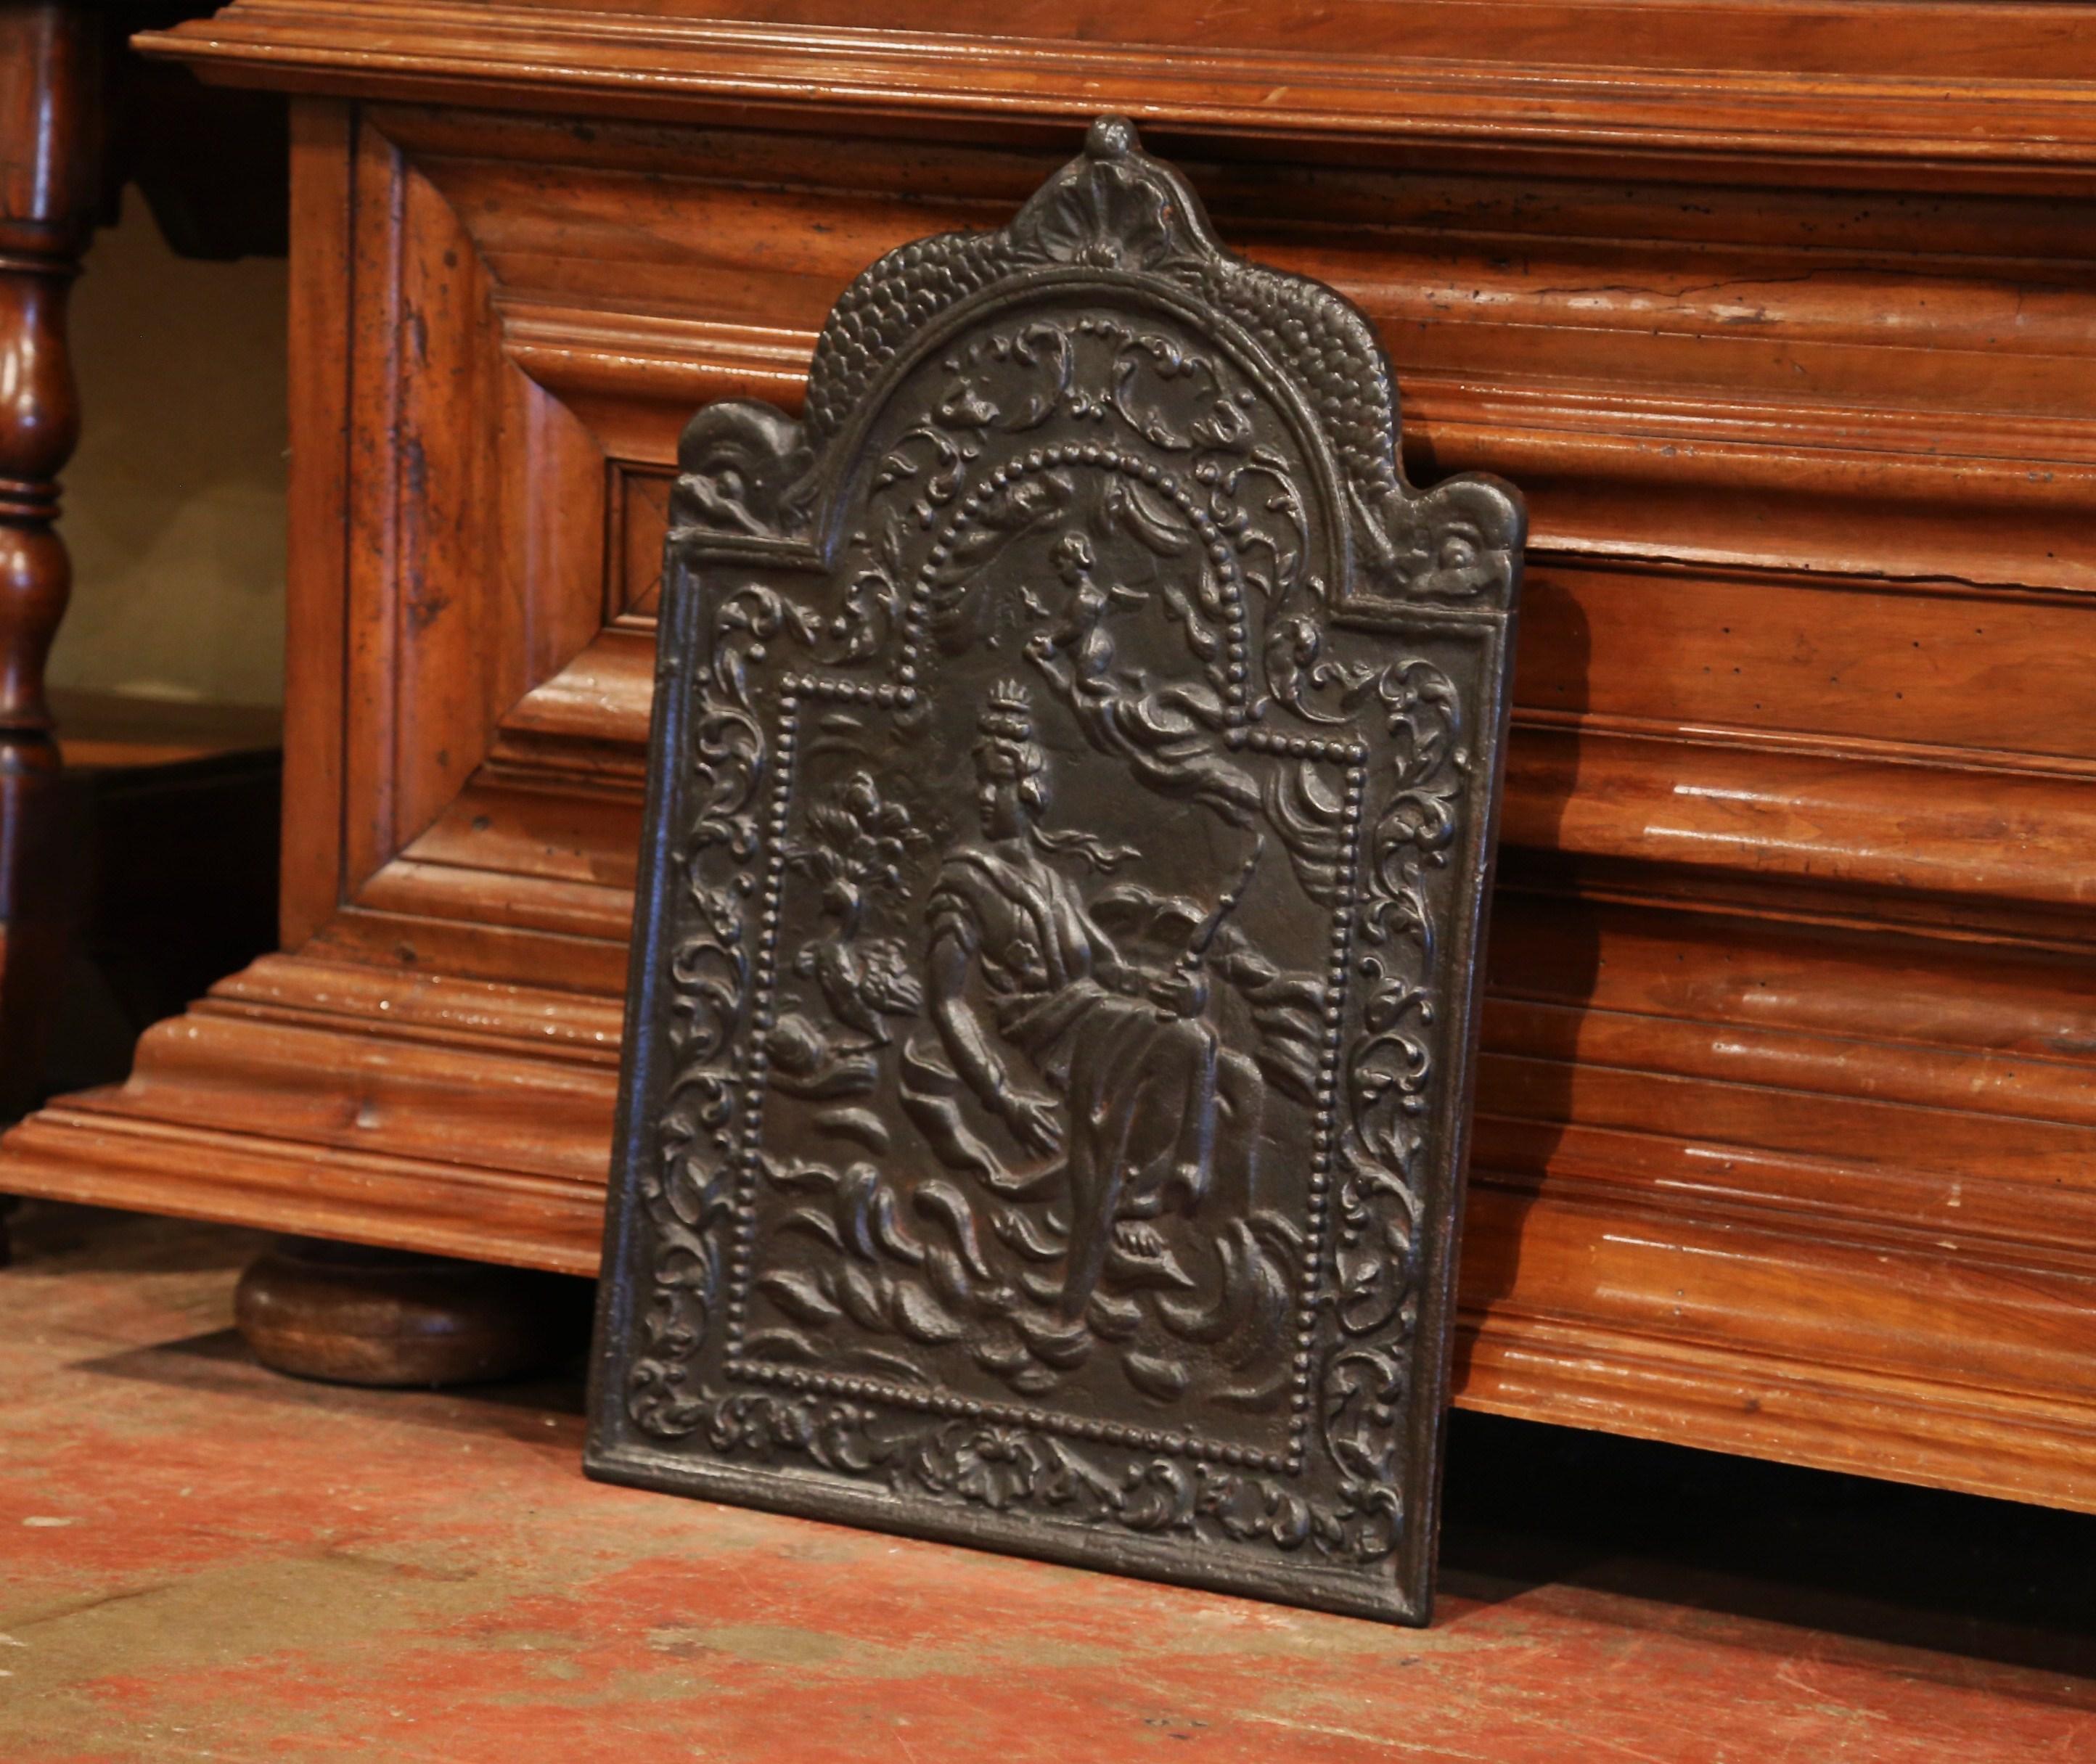 Use this fire back to decorate a fireplace or place it behind a stove in the kitchen. Crafted in France, circa 1860, the mythological iron plaque has an arched top flanked with dolphin figures on both sides. The central composition features a scene